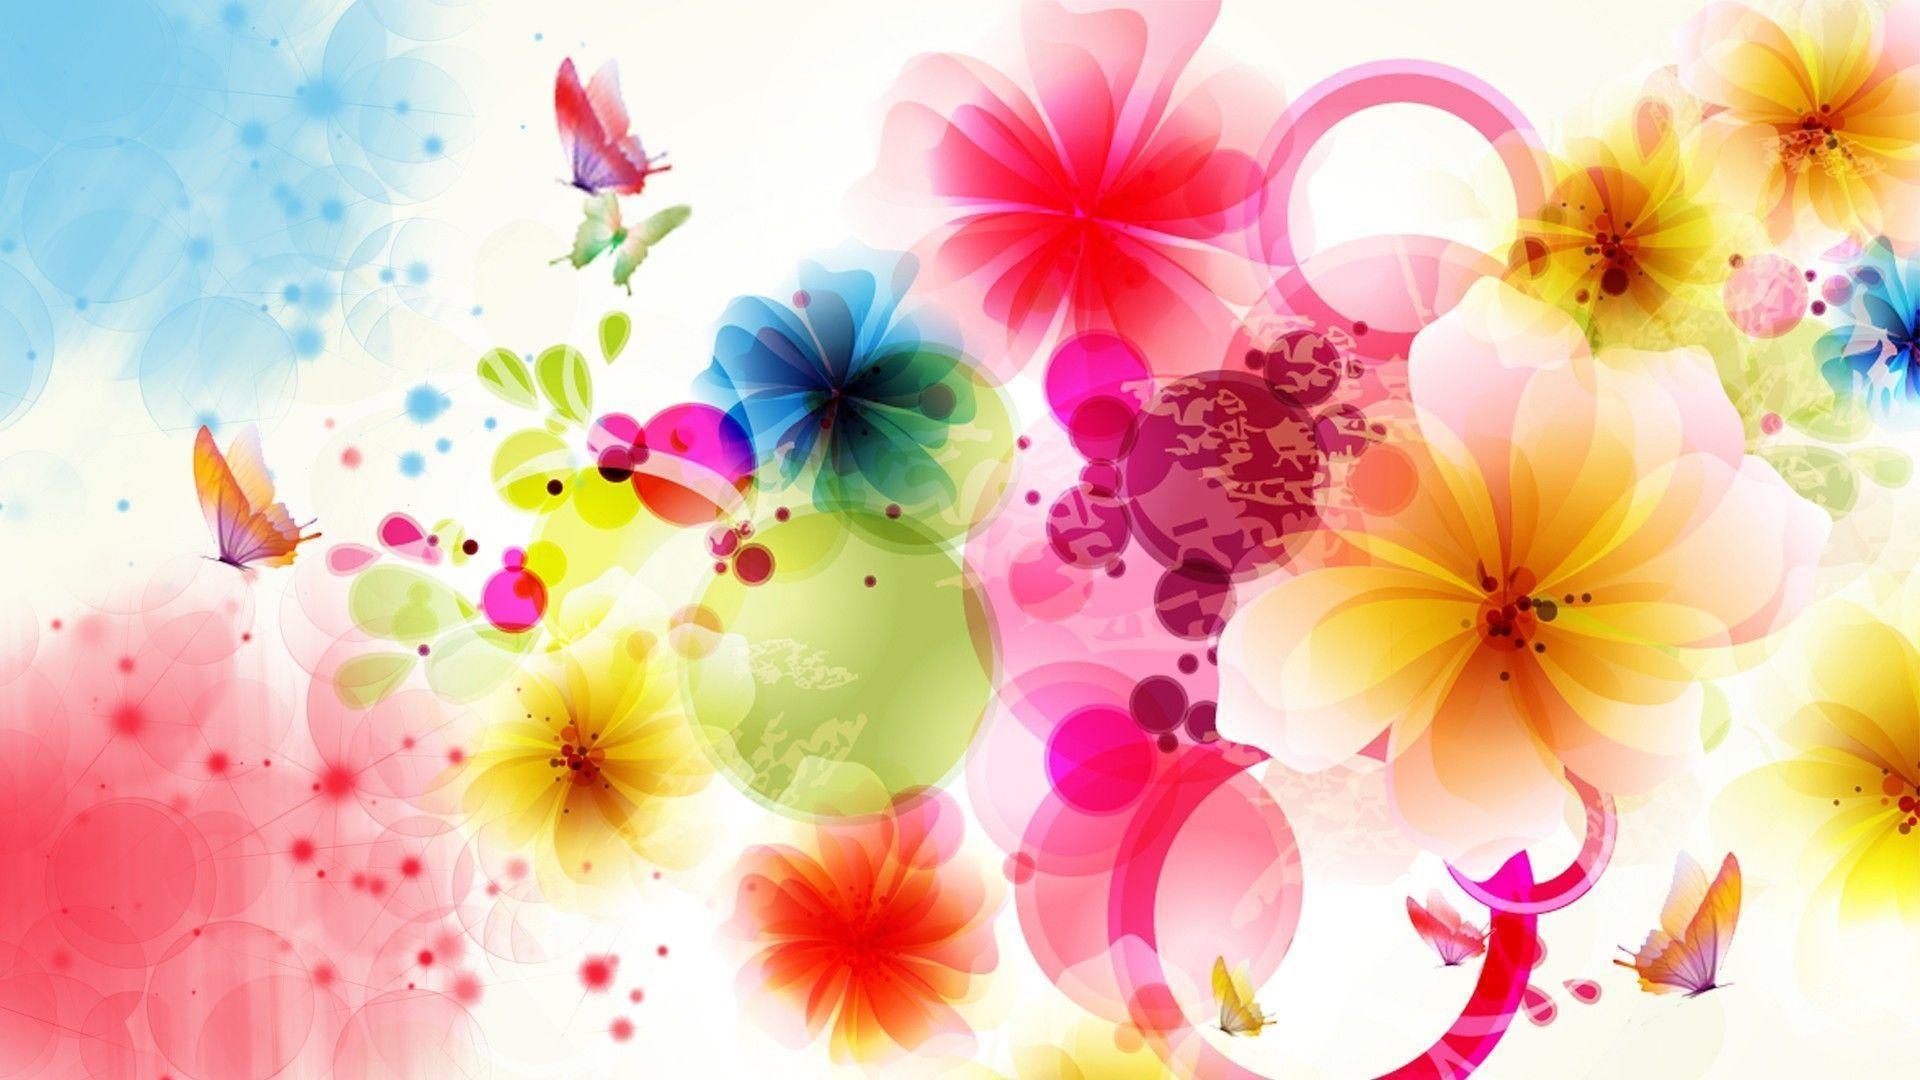 Exotic Abstract Floral Wallpaper HD Background 1920x1080PX